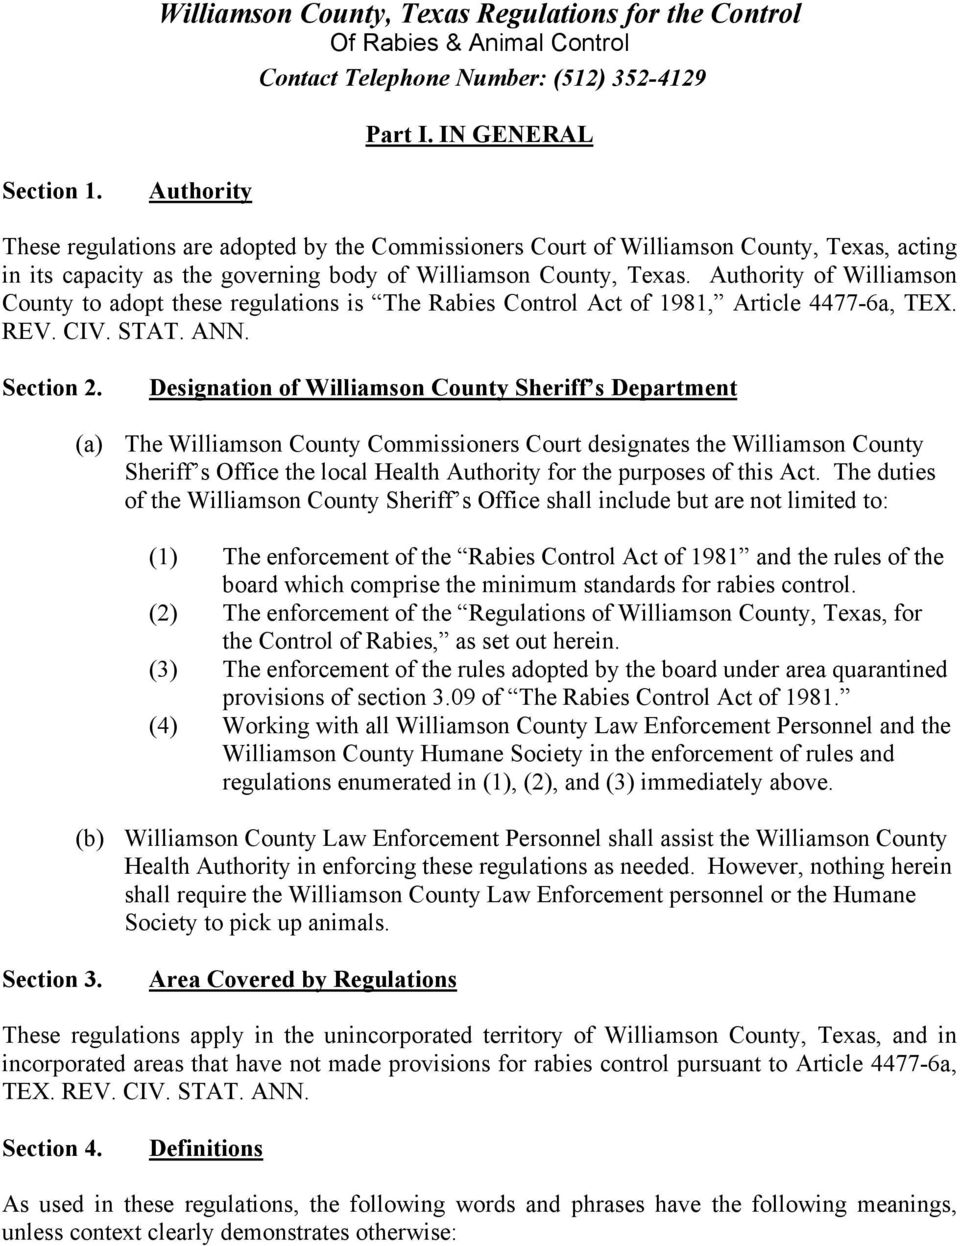 Authority of Williamson County to adopt these regulations is The Rabies Control Act of 1981, Article 4477-6a, TEX. REV. CIV. STAT. ANN. Section 2.